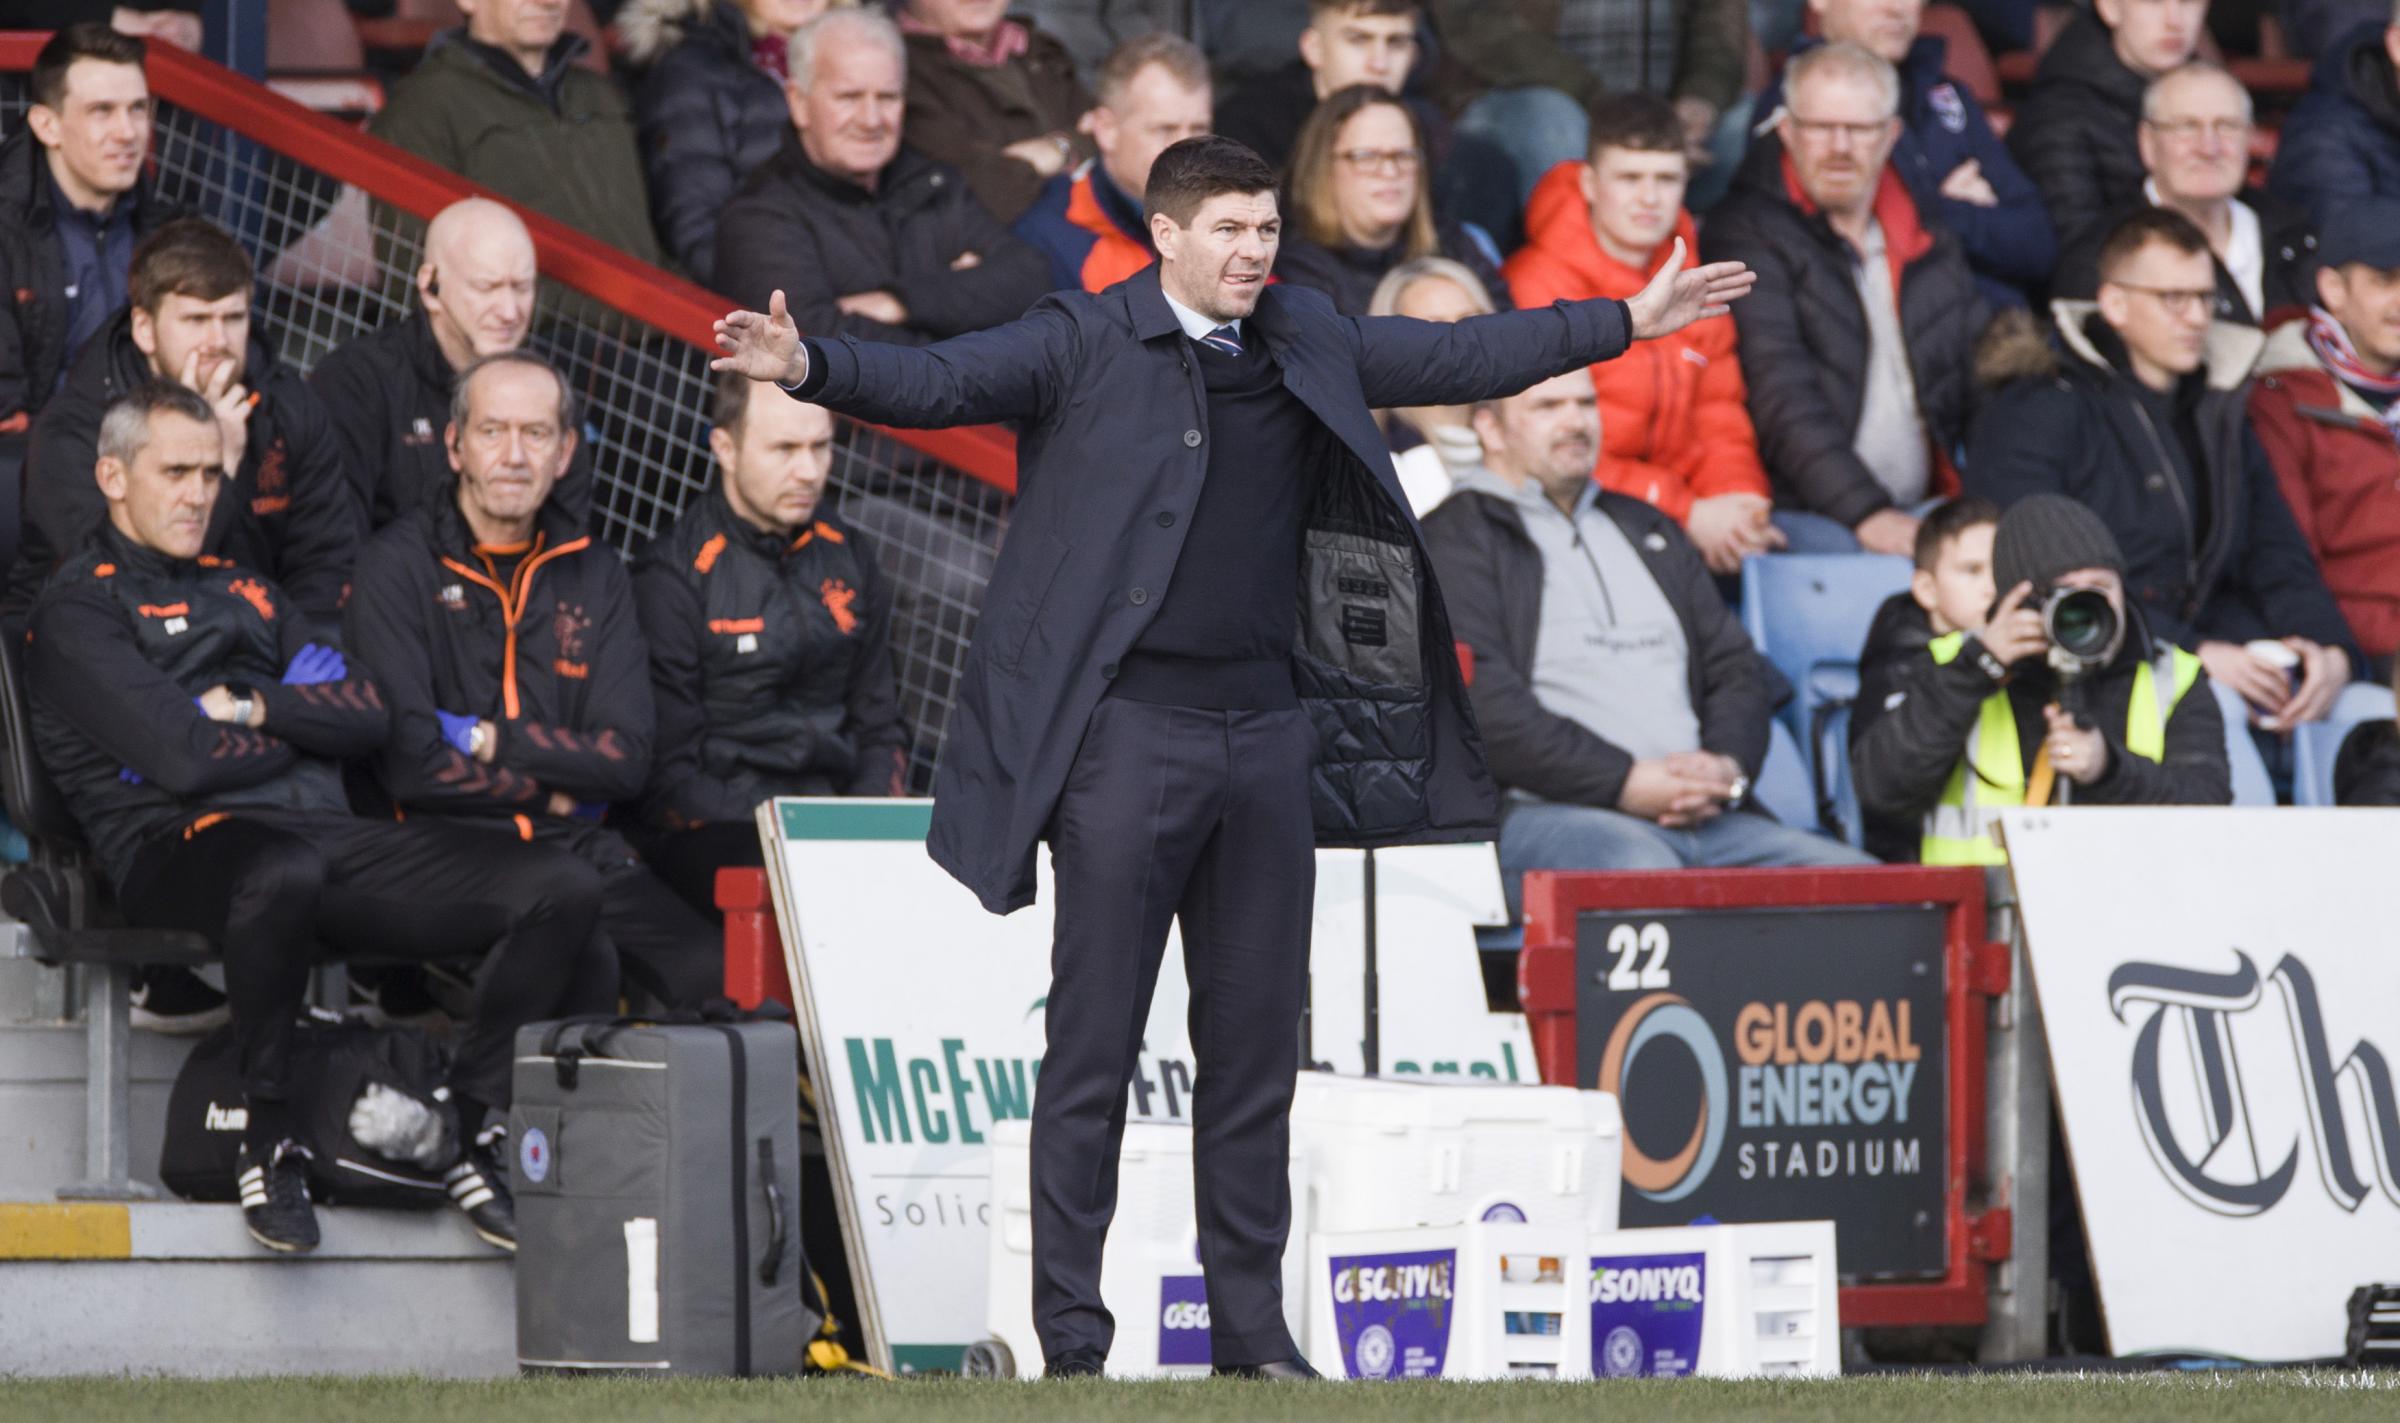 Ross County 0-1 Rangers: Steven Gerrard's side grind out much-needed win in Dingwall